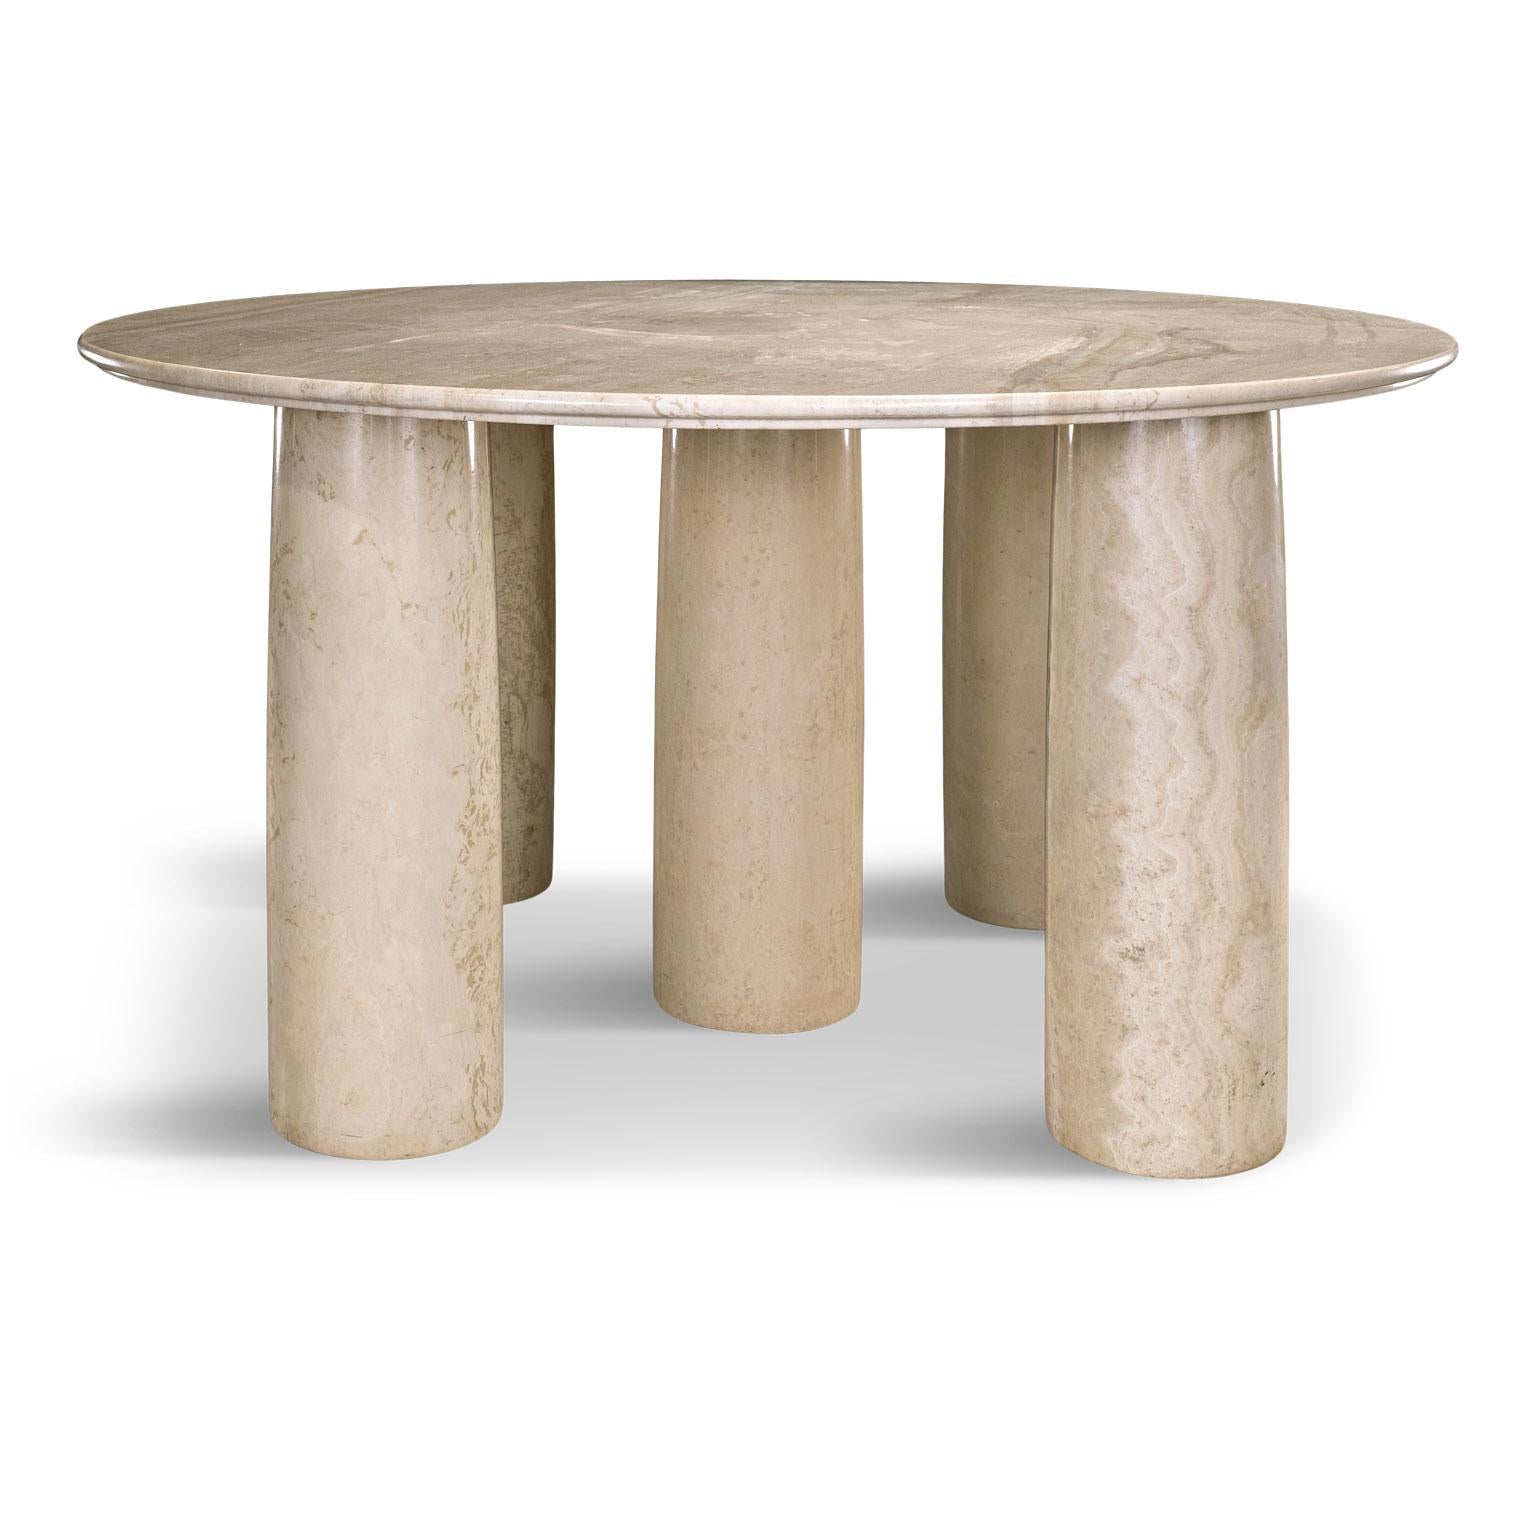 Mario Bellini 'Il Colonnato' cream-color marble table for Cassina in the 1970s. Massive heavy round top raised upon five column legs, all crafted from cream-color solid marble. Veining introduces additional hues of very light taupe and beige. Top is